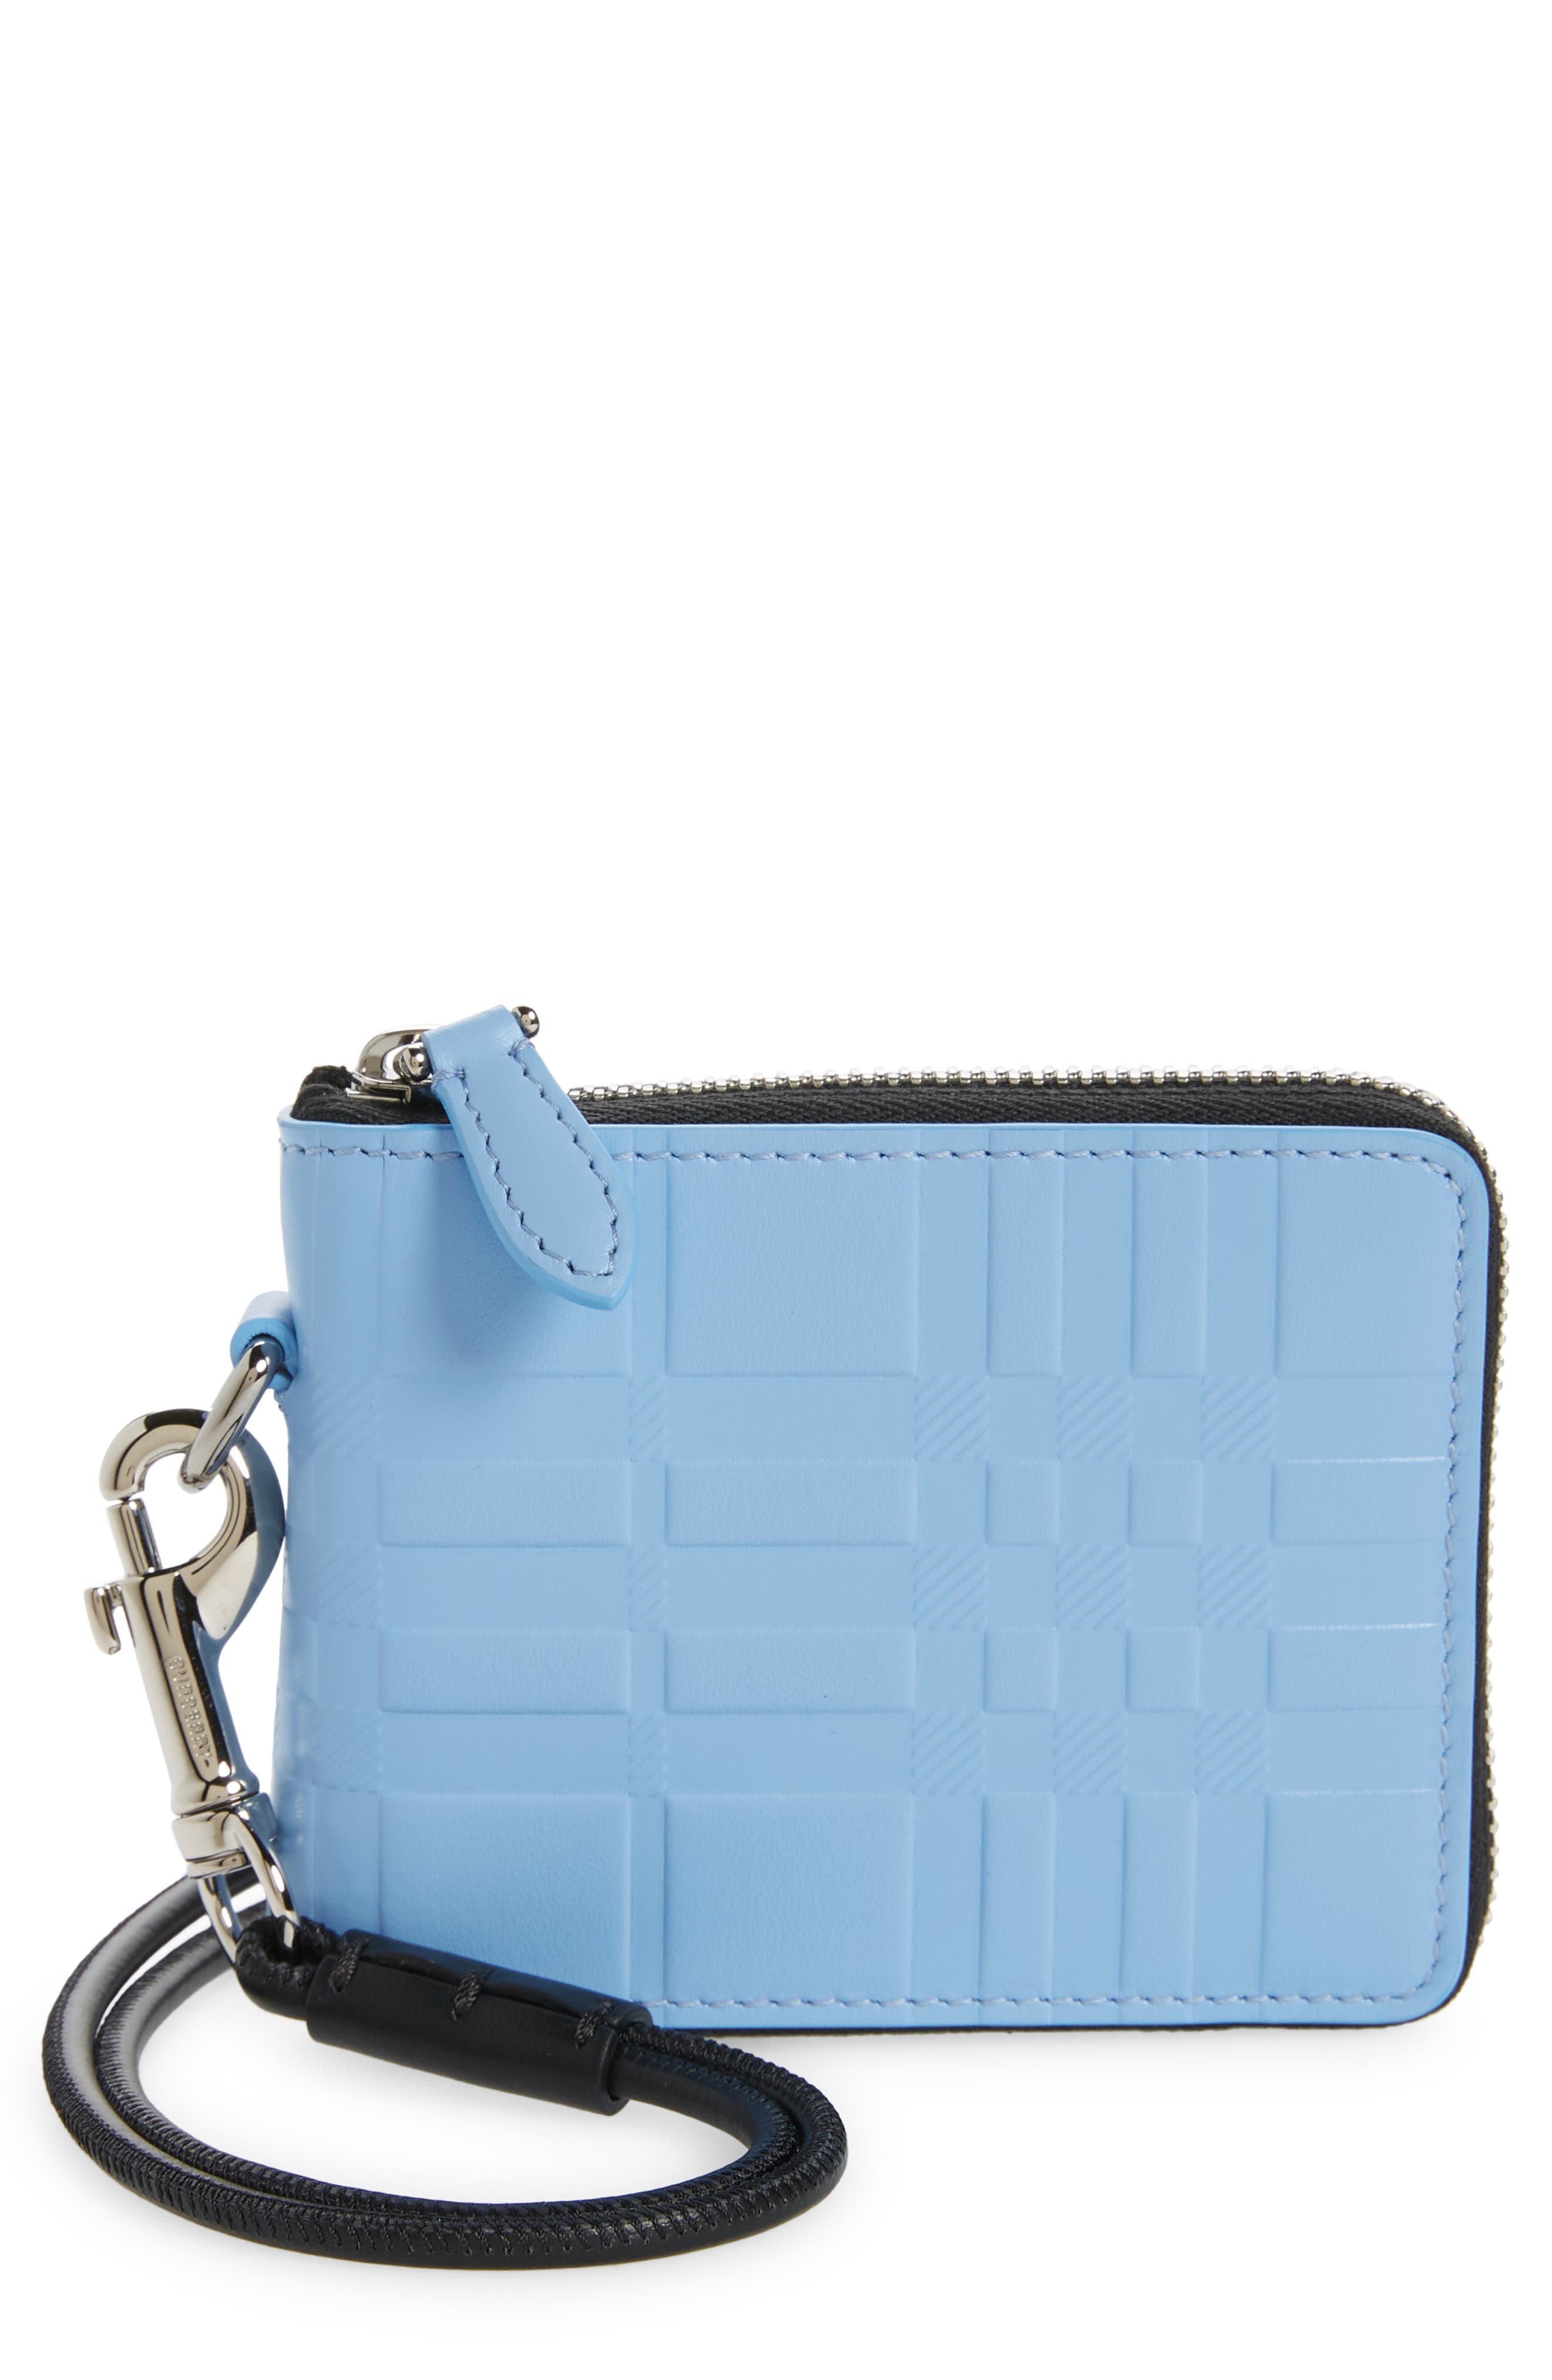 Burberry Daniels Check Embossed Leather Wallet in Soft Cornflower Blue at Nordstrom